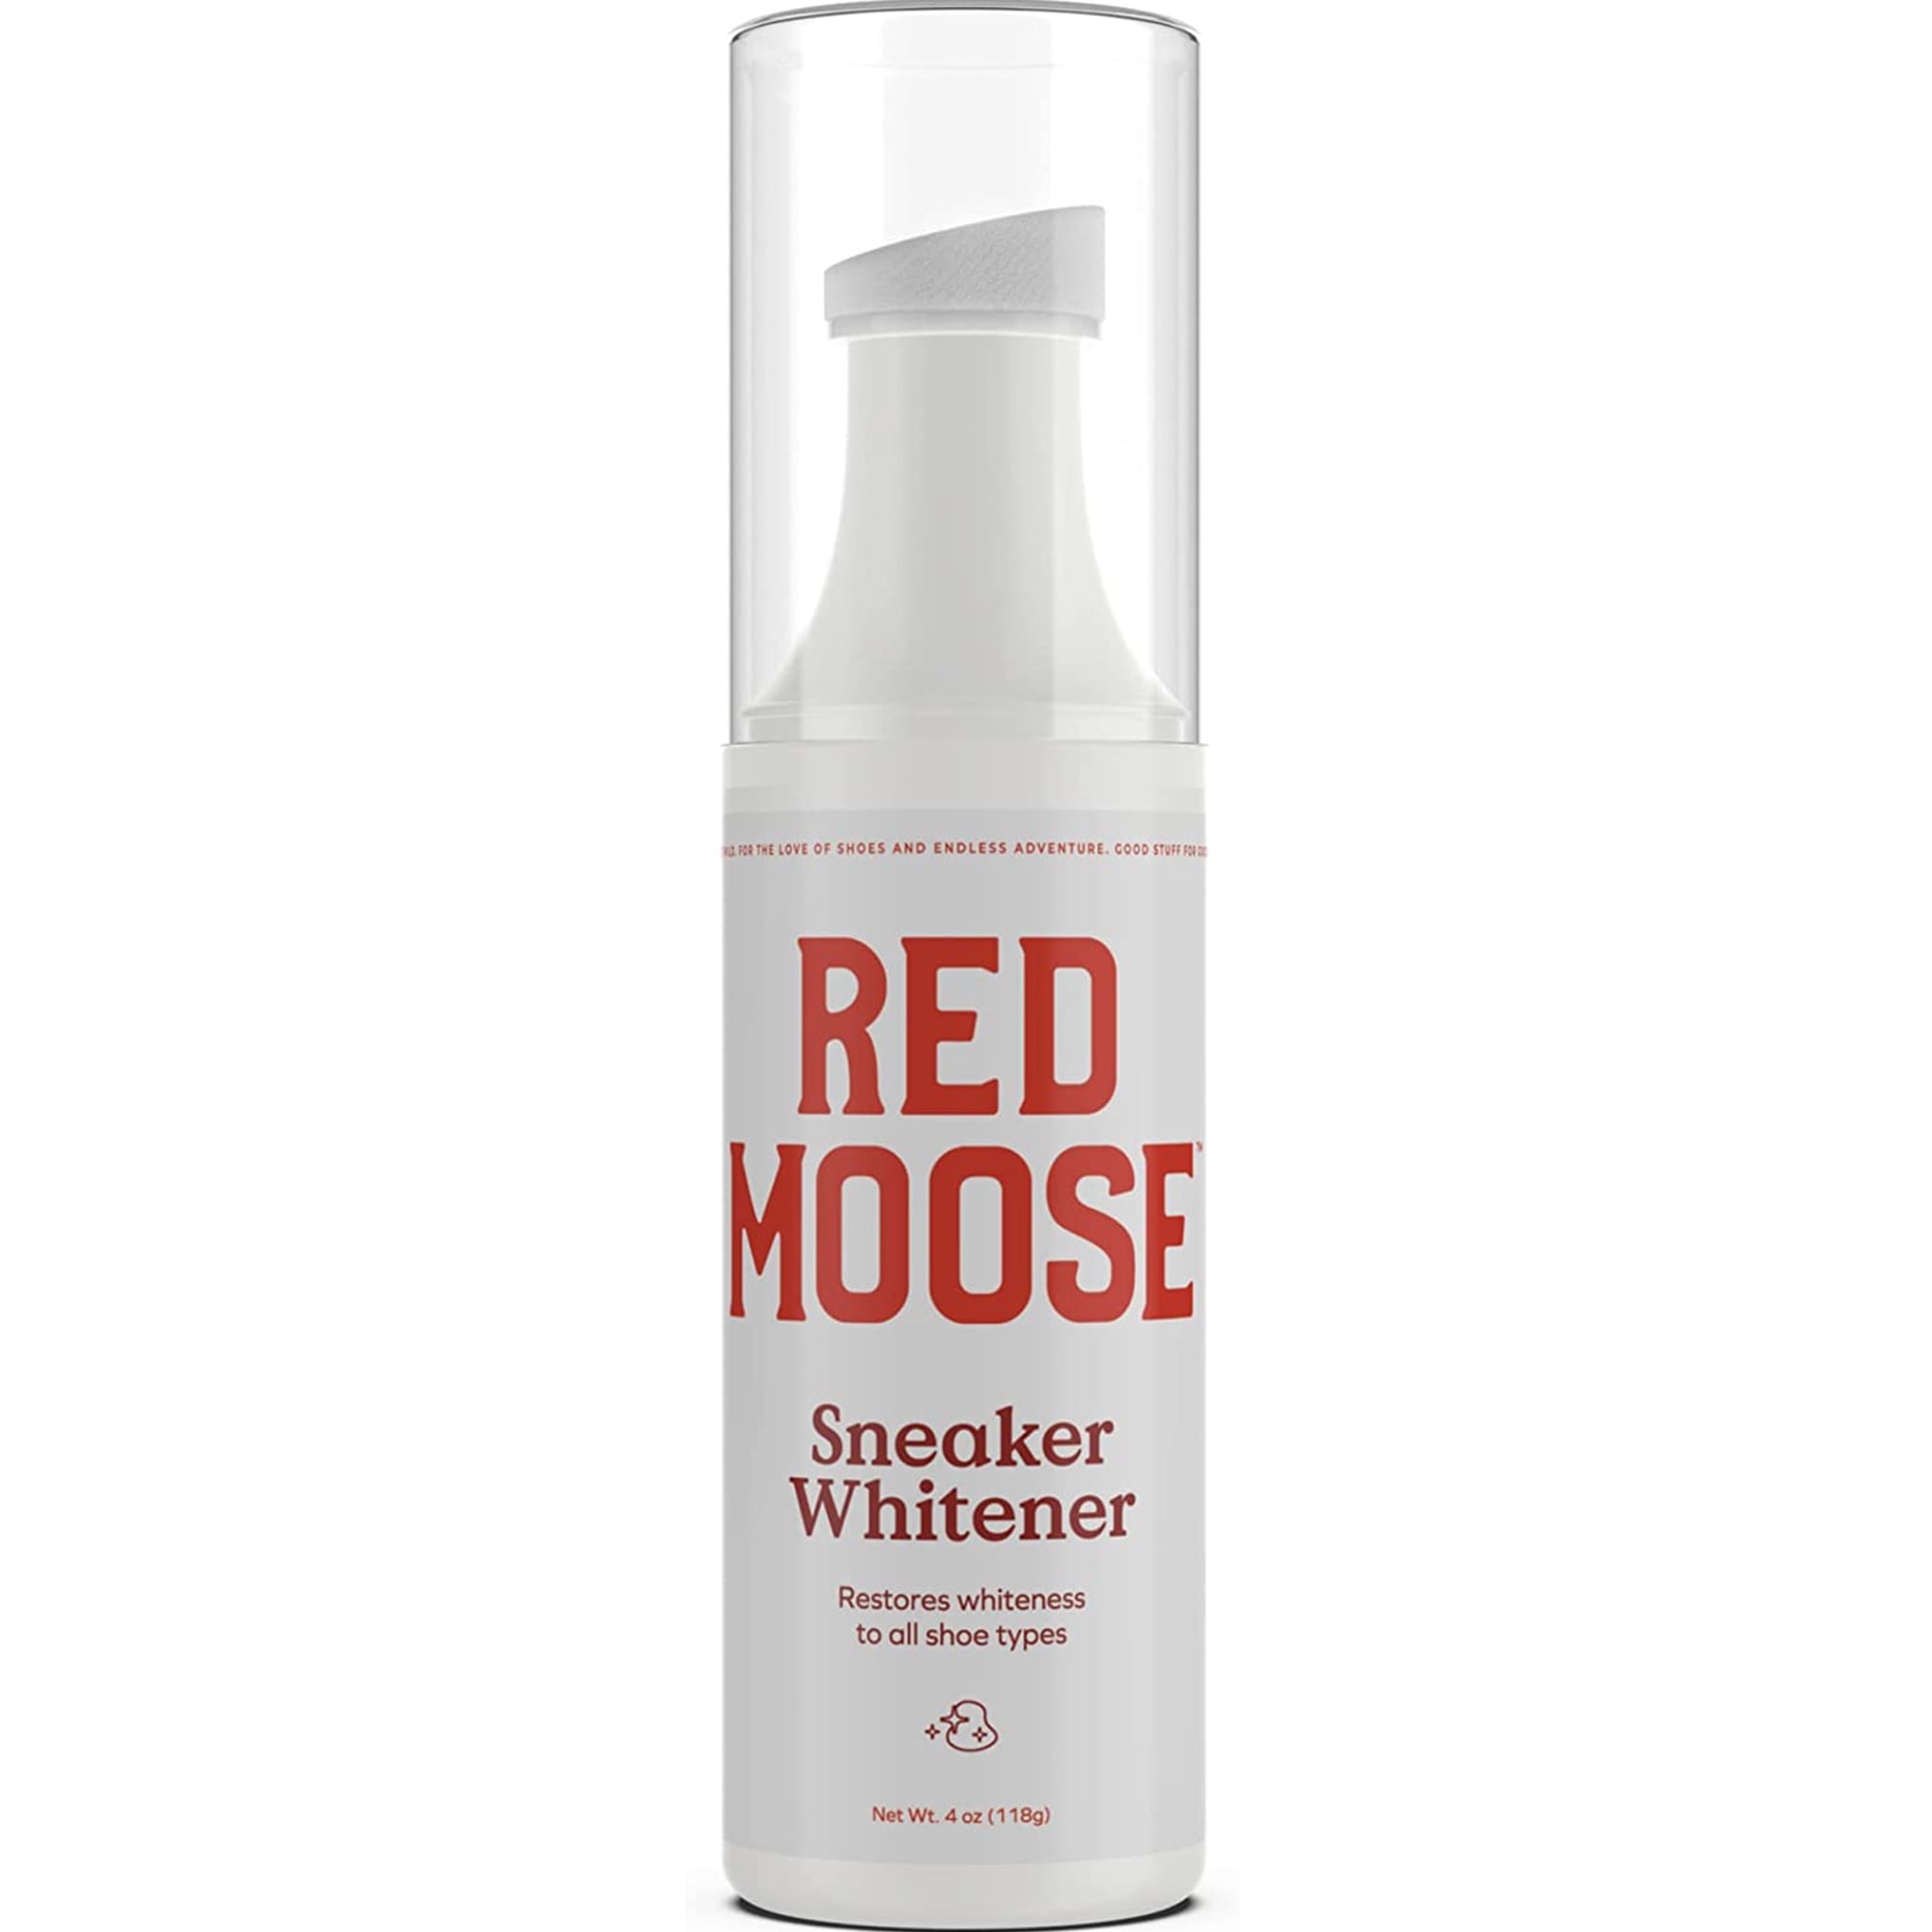 Red Moose Liquid Shoe Polish for Leather Dress, Boots, Shoes, and More, 4 oz Gray, Adult Unisex